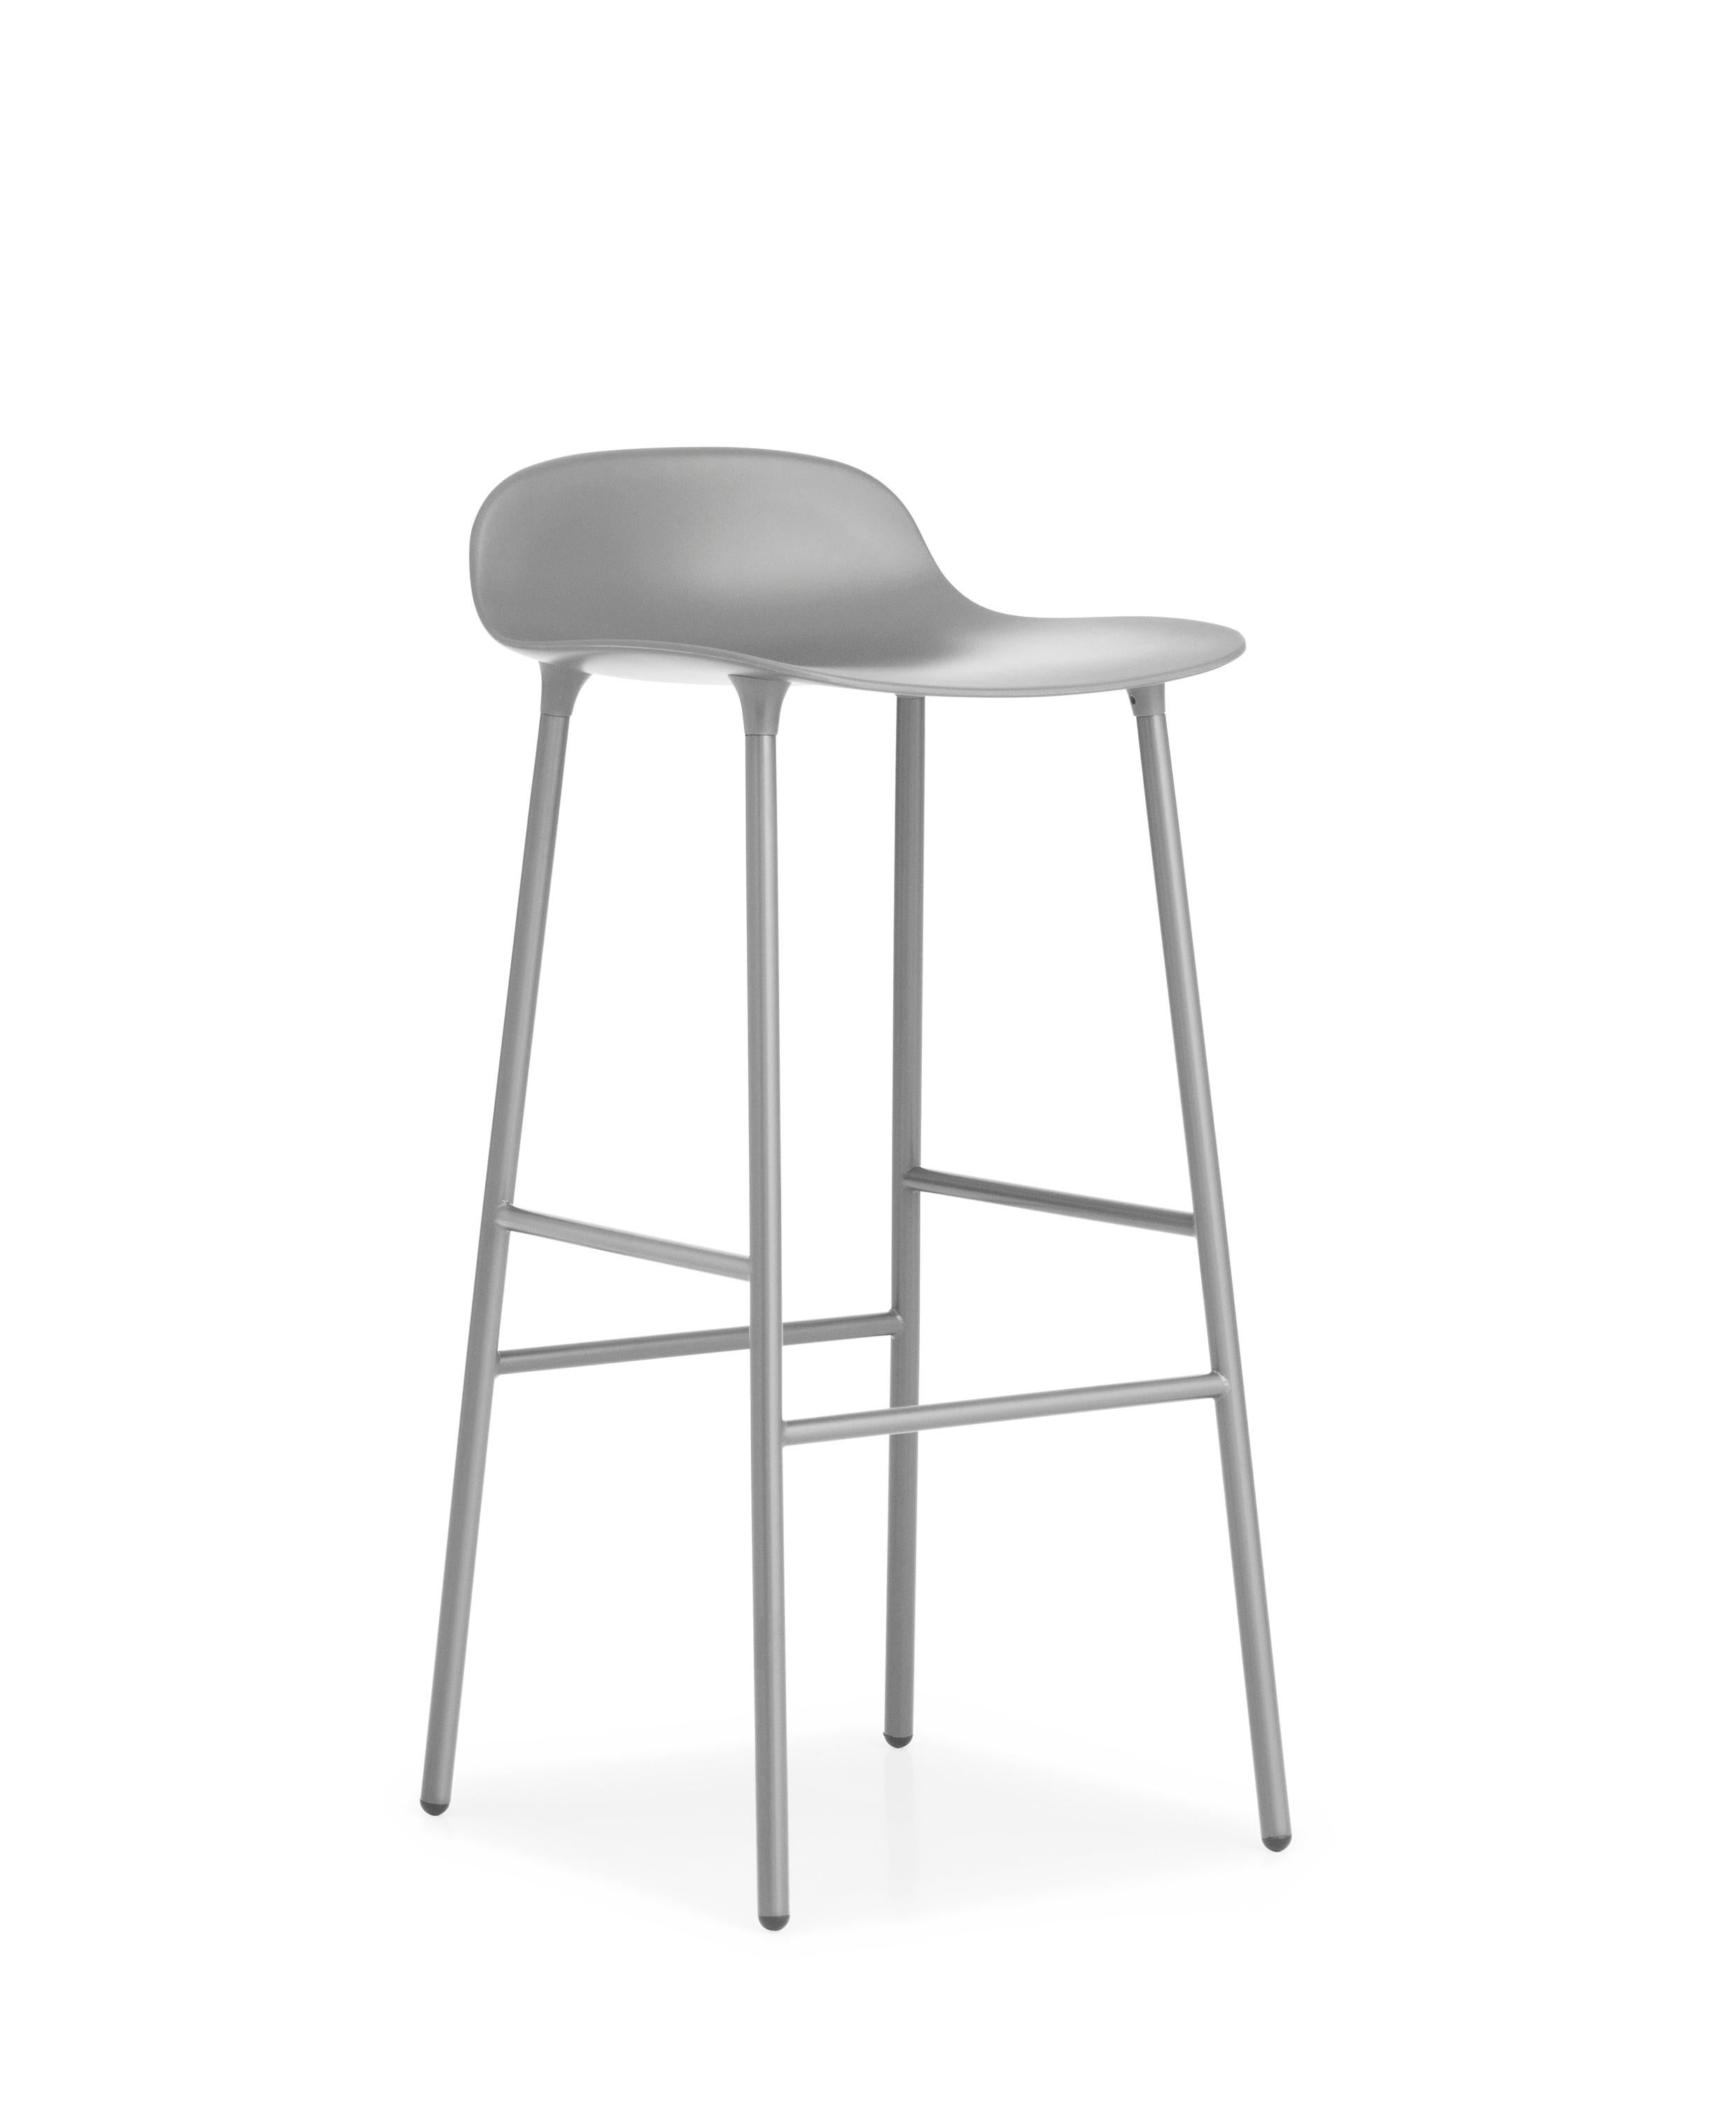 For Sale: Gray (Form Gray) Normann Copenhagen Form Barstool in Steel by Simon Legald